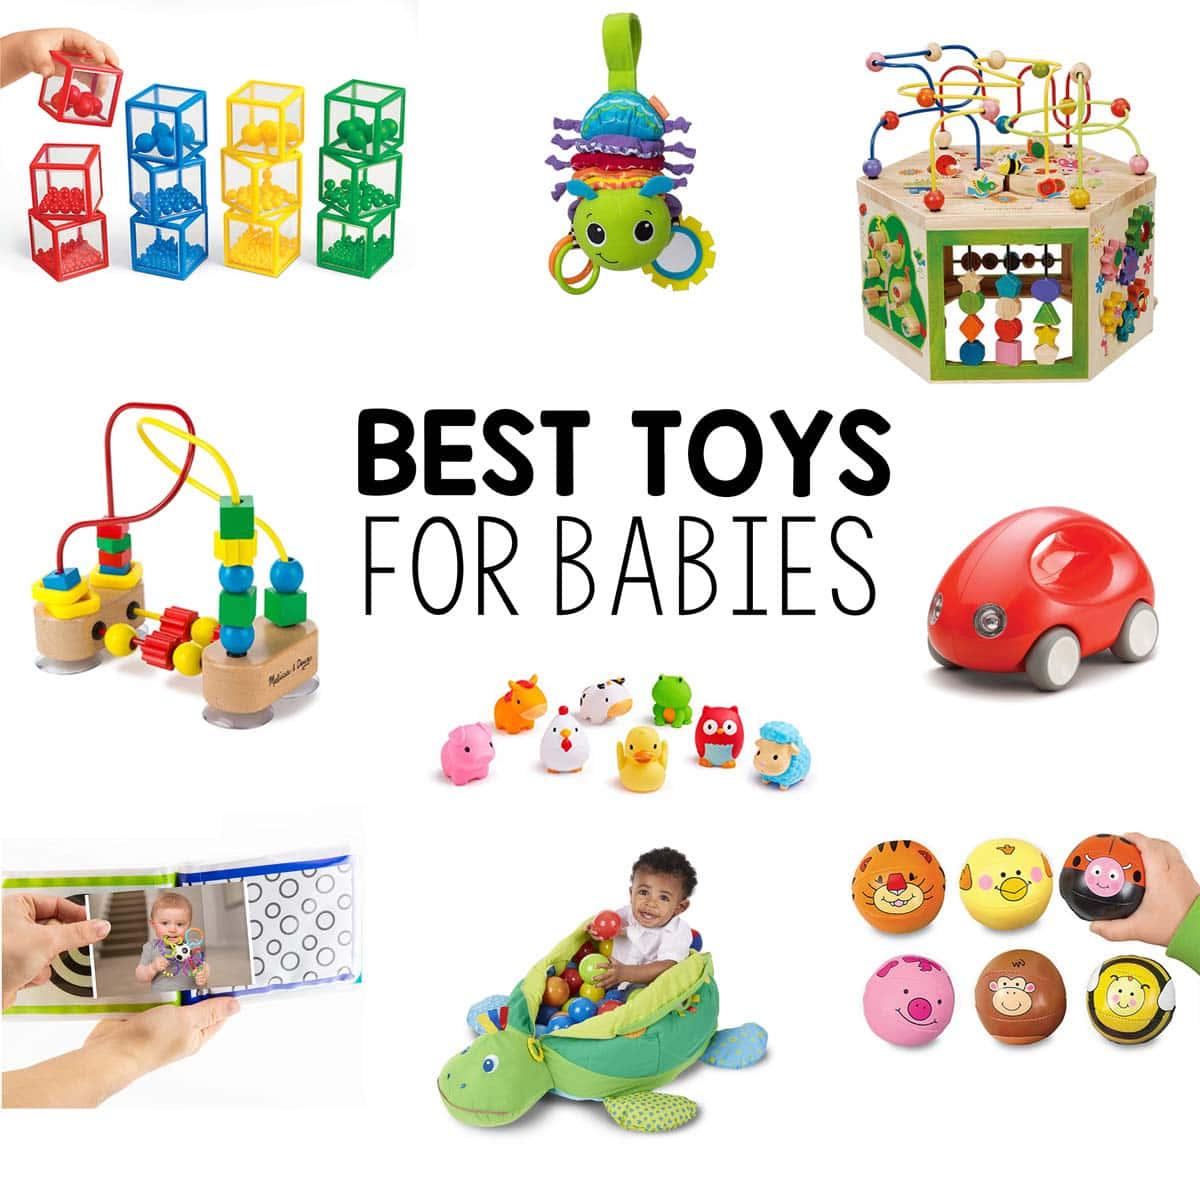 Take Home Some Fun With Colorful Toys